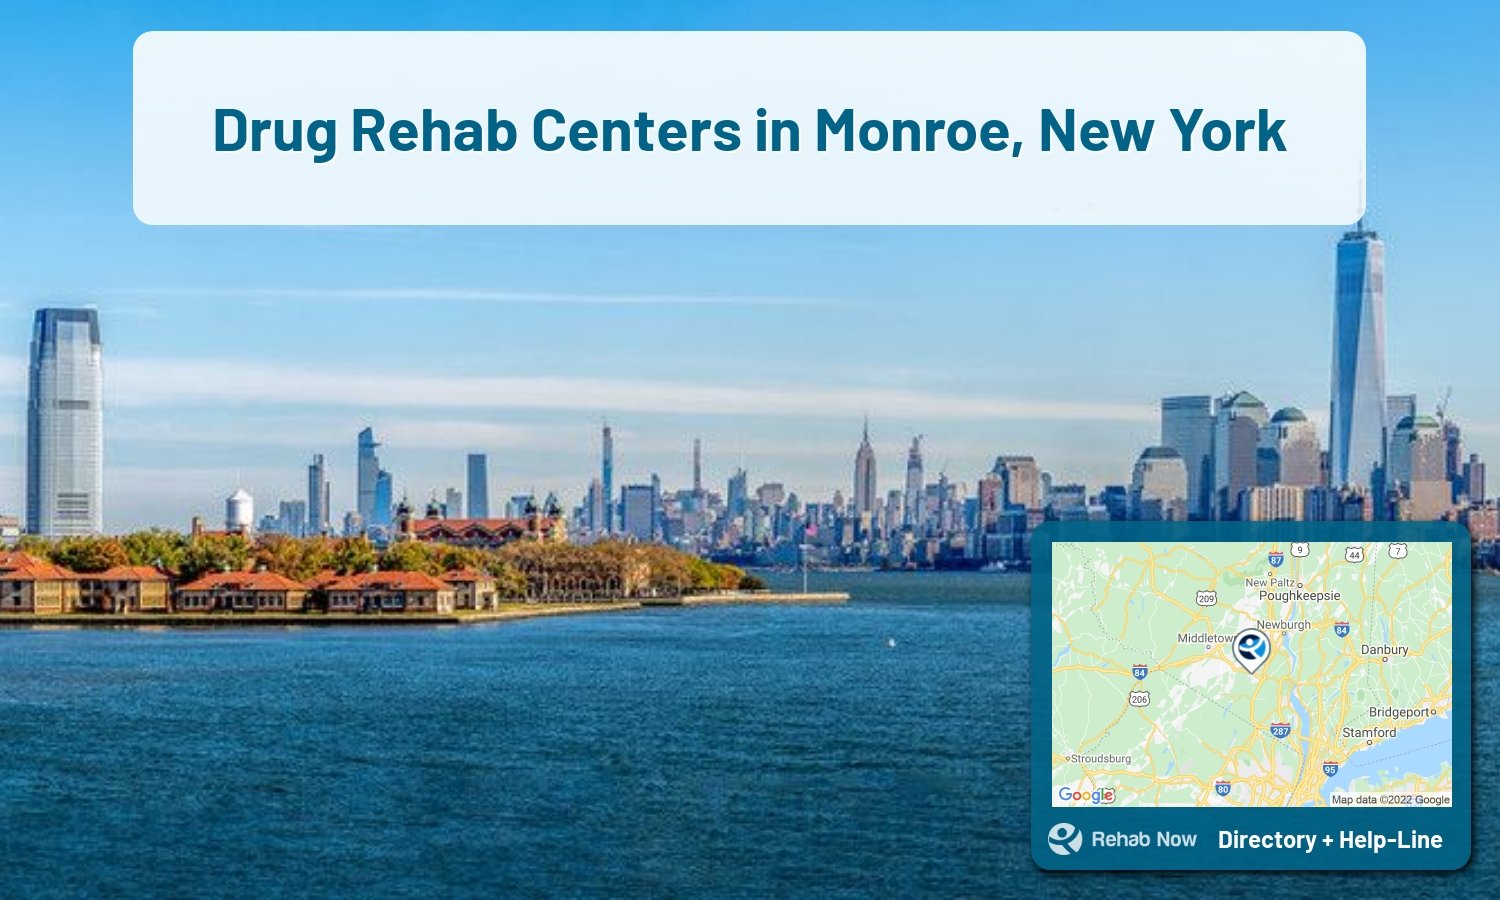 Monroe, NY Treatment Centers. Find drug rehab in Monroe, New York, or detox and treatment programs. Get the right help now!